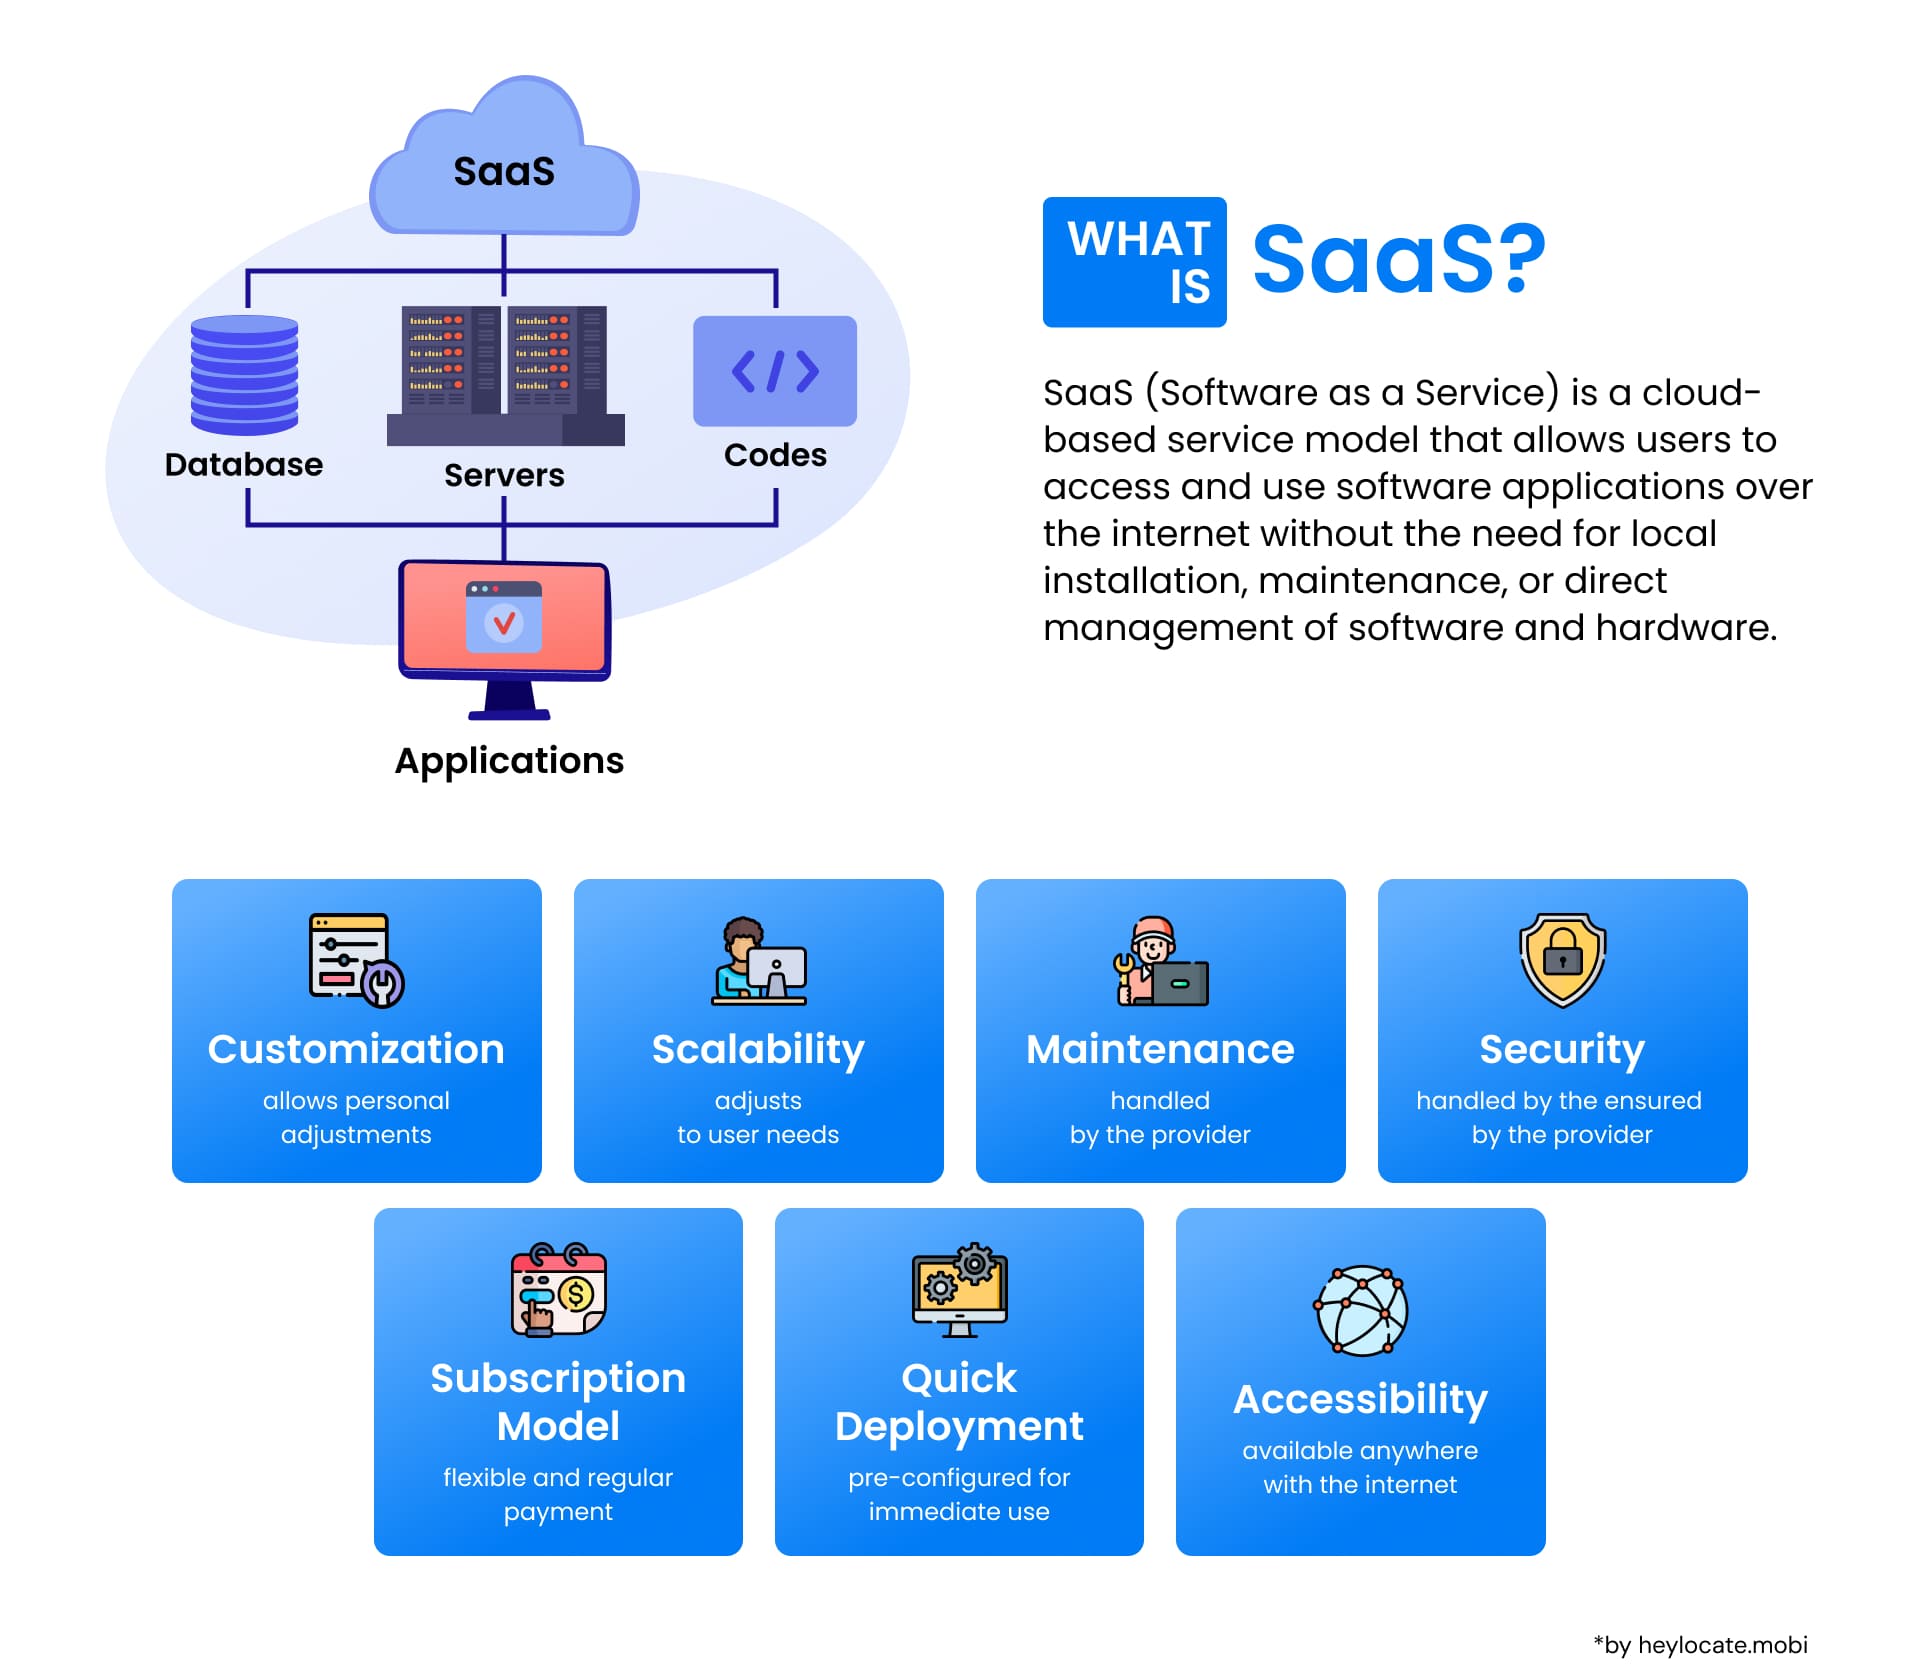 Infographic explaining what SaaS is, featuring a central cloud symbol with components such as database, servers, and codes connected to various applications.